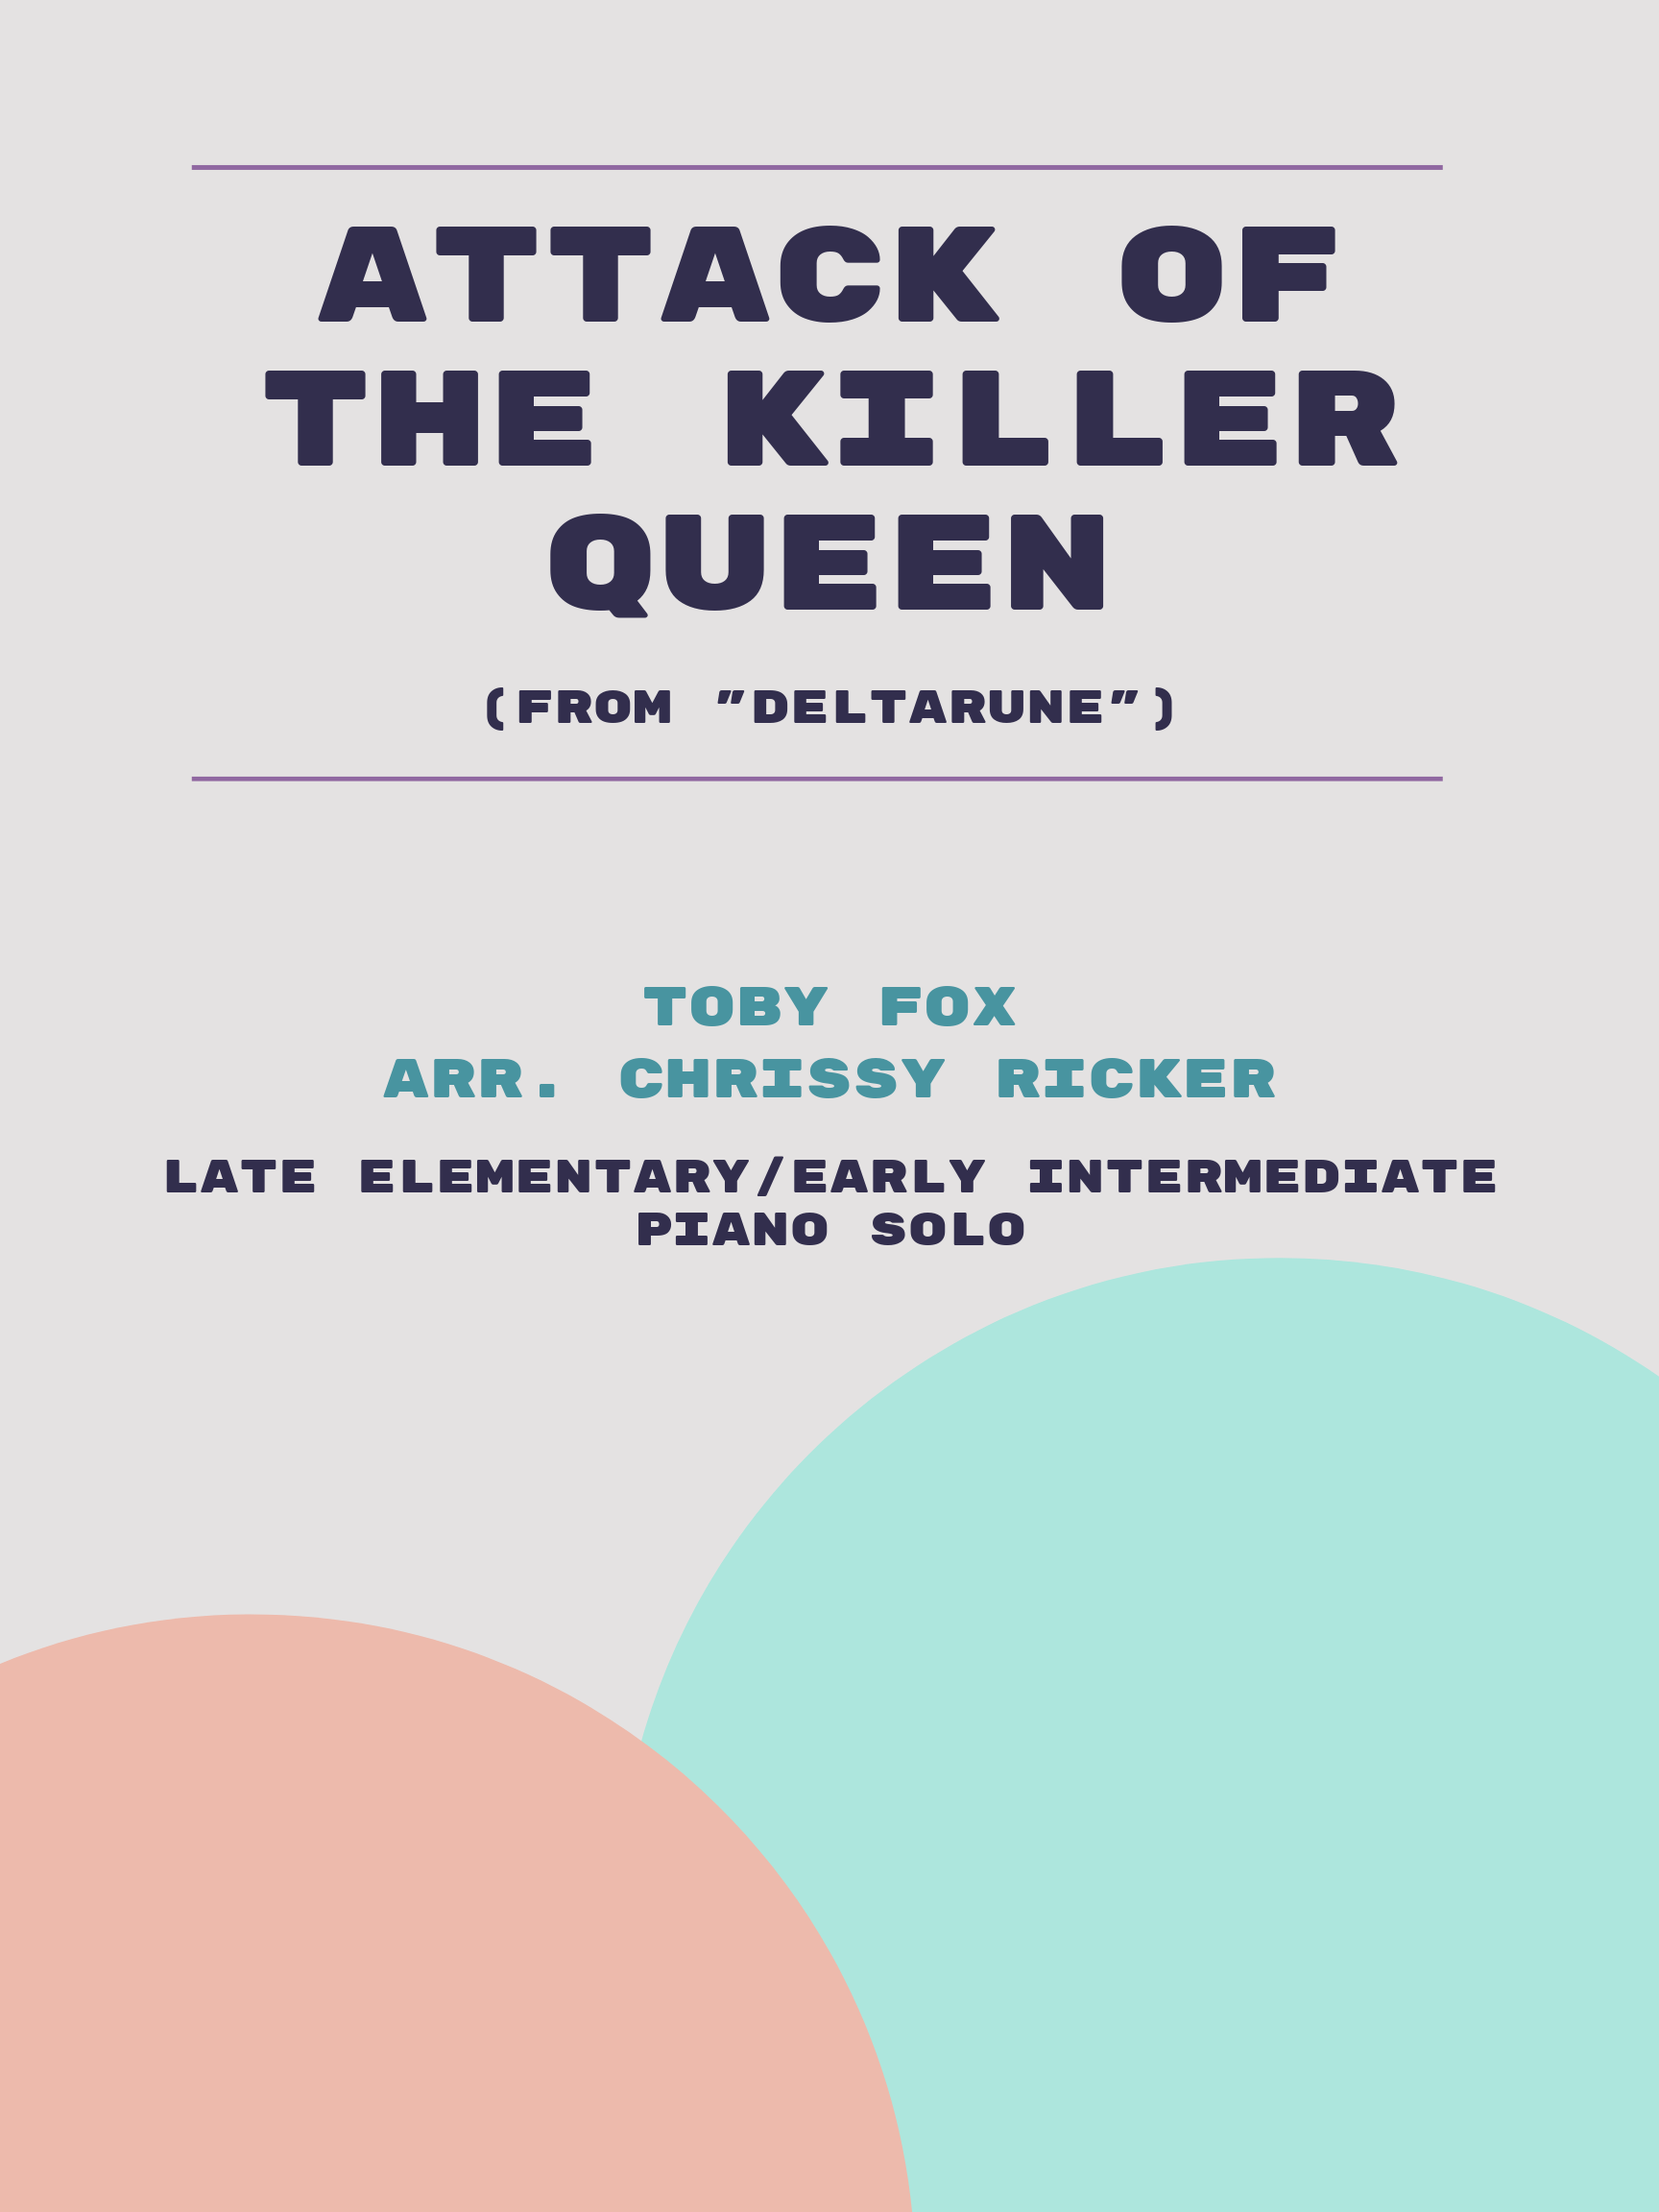 Attack of the Killer Queen by Toby Fox